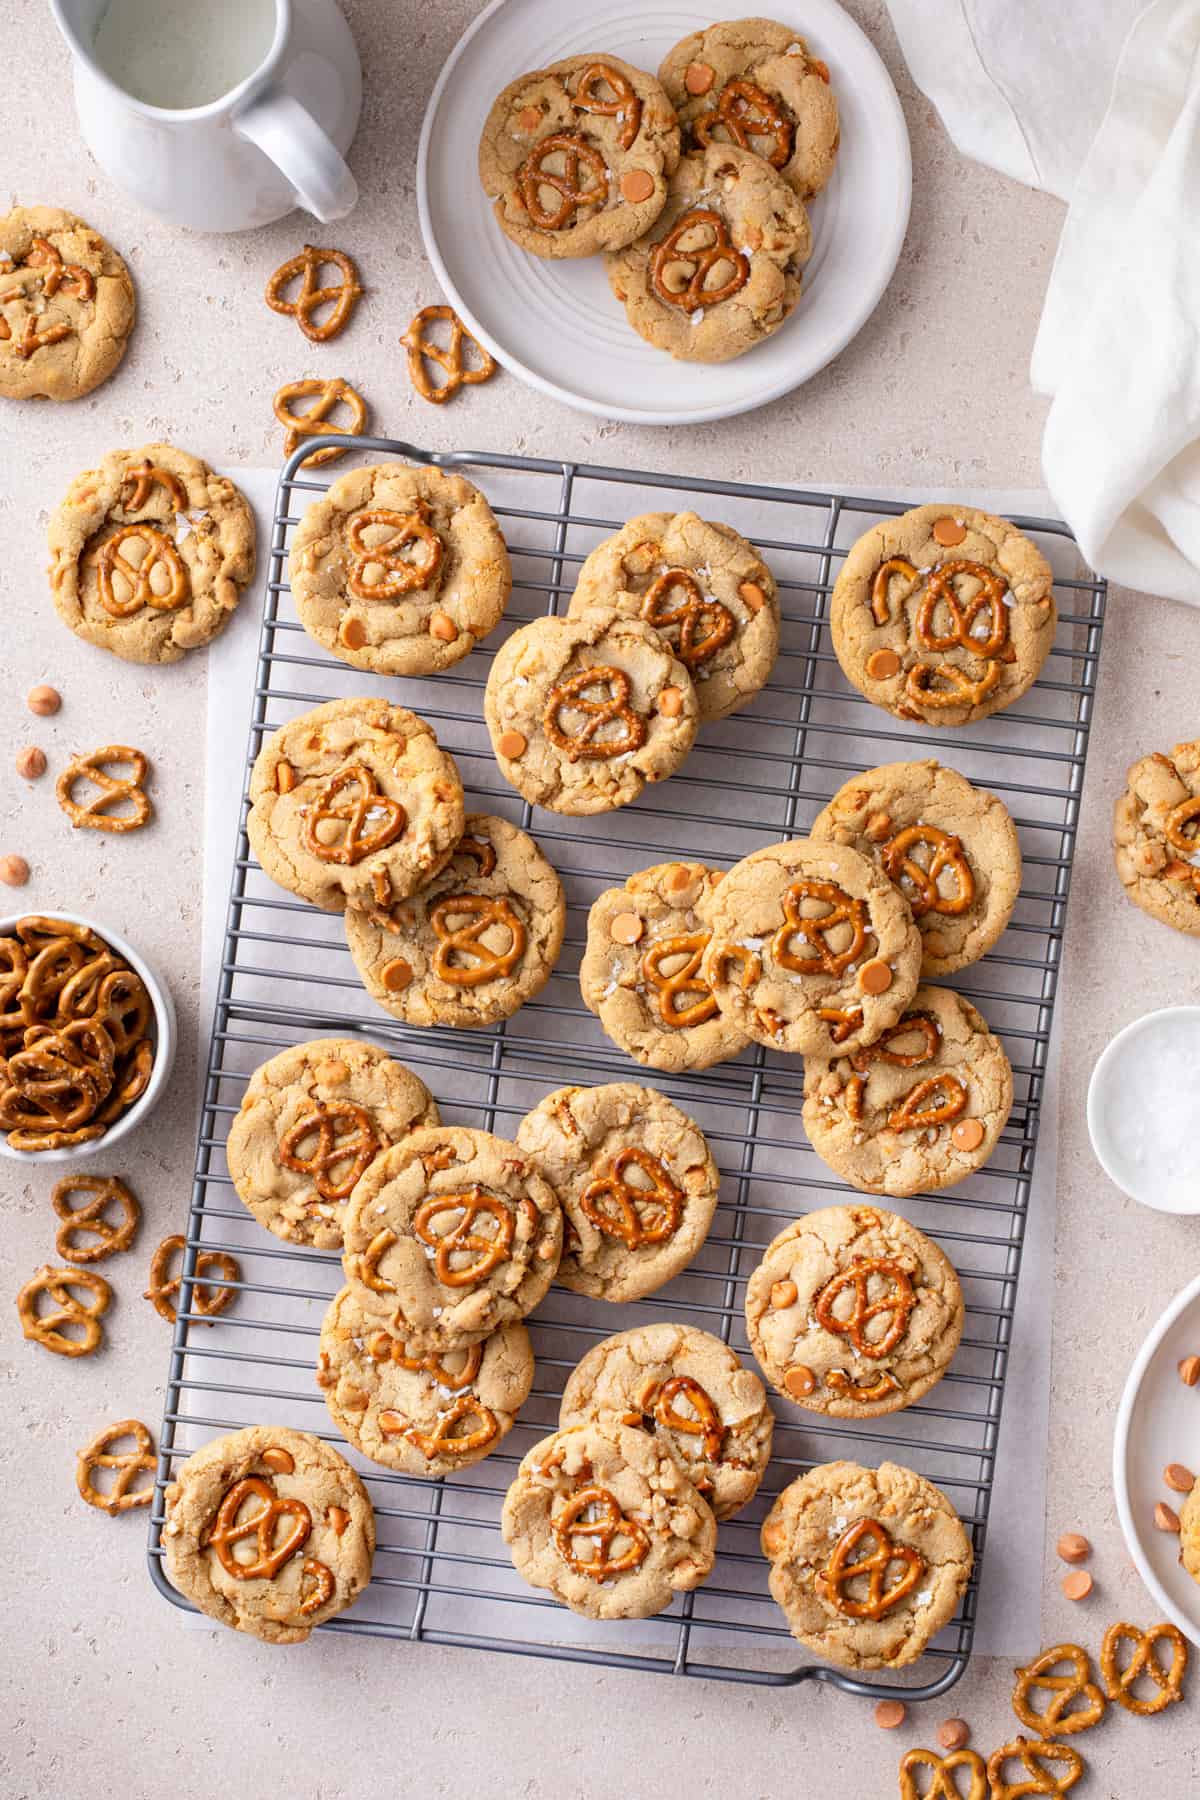 Overhead view of salted caramel pretzel cookies cooling on a wire rack.